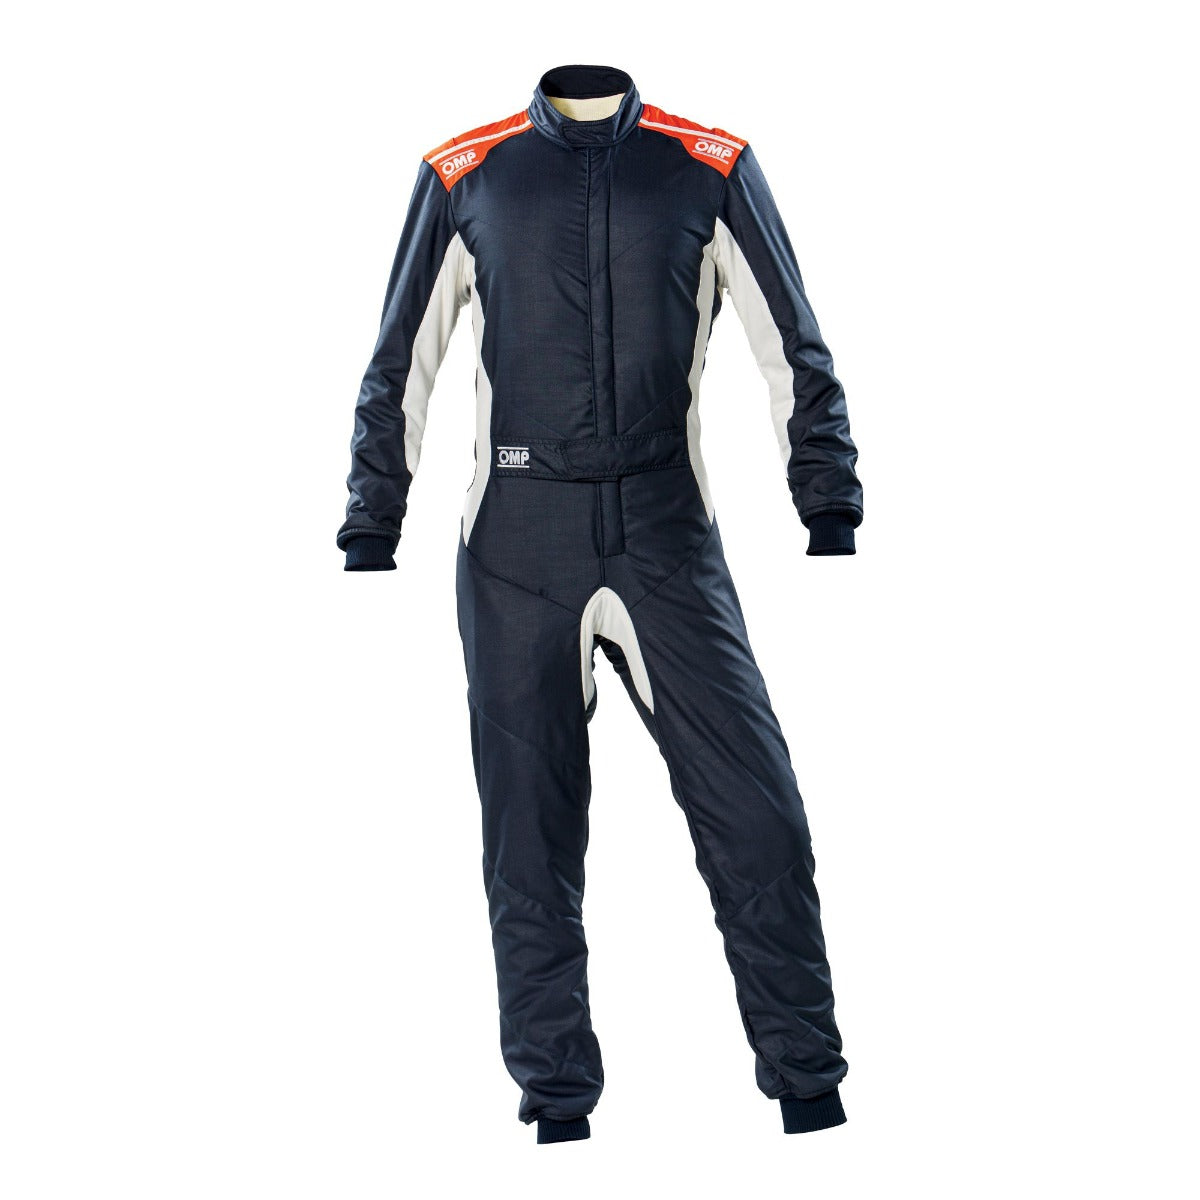 OMP ONE-S Racing Fire Suit Blue Front Image CLEARANCE SALE Lowest Price and biggest discount